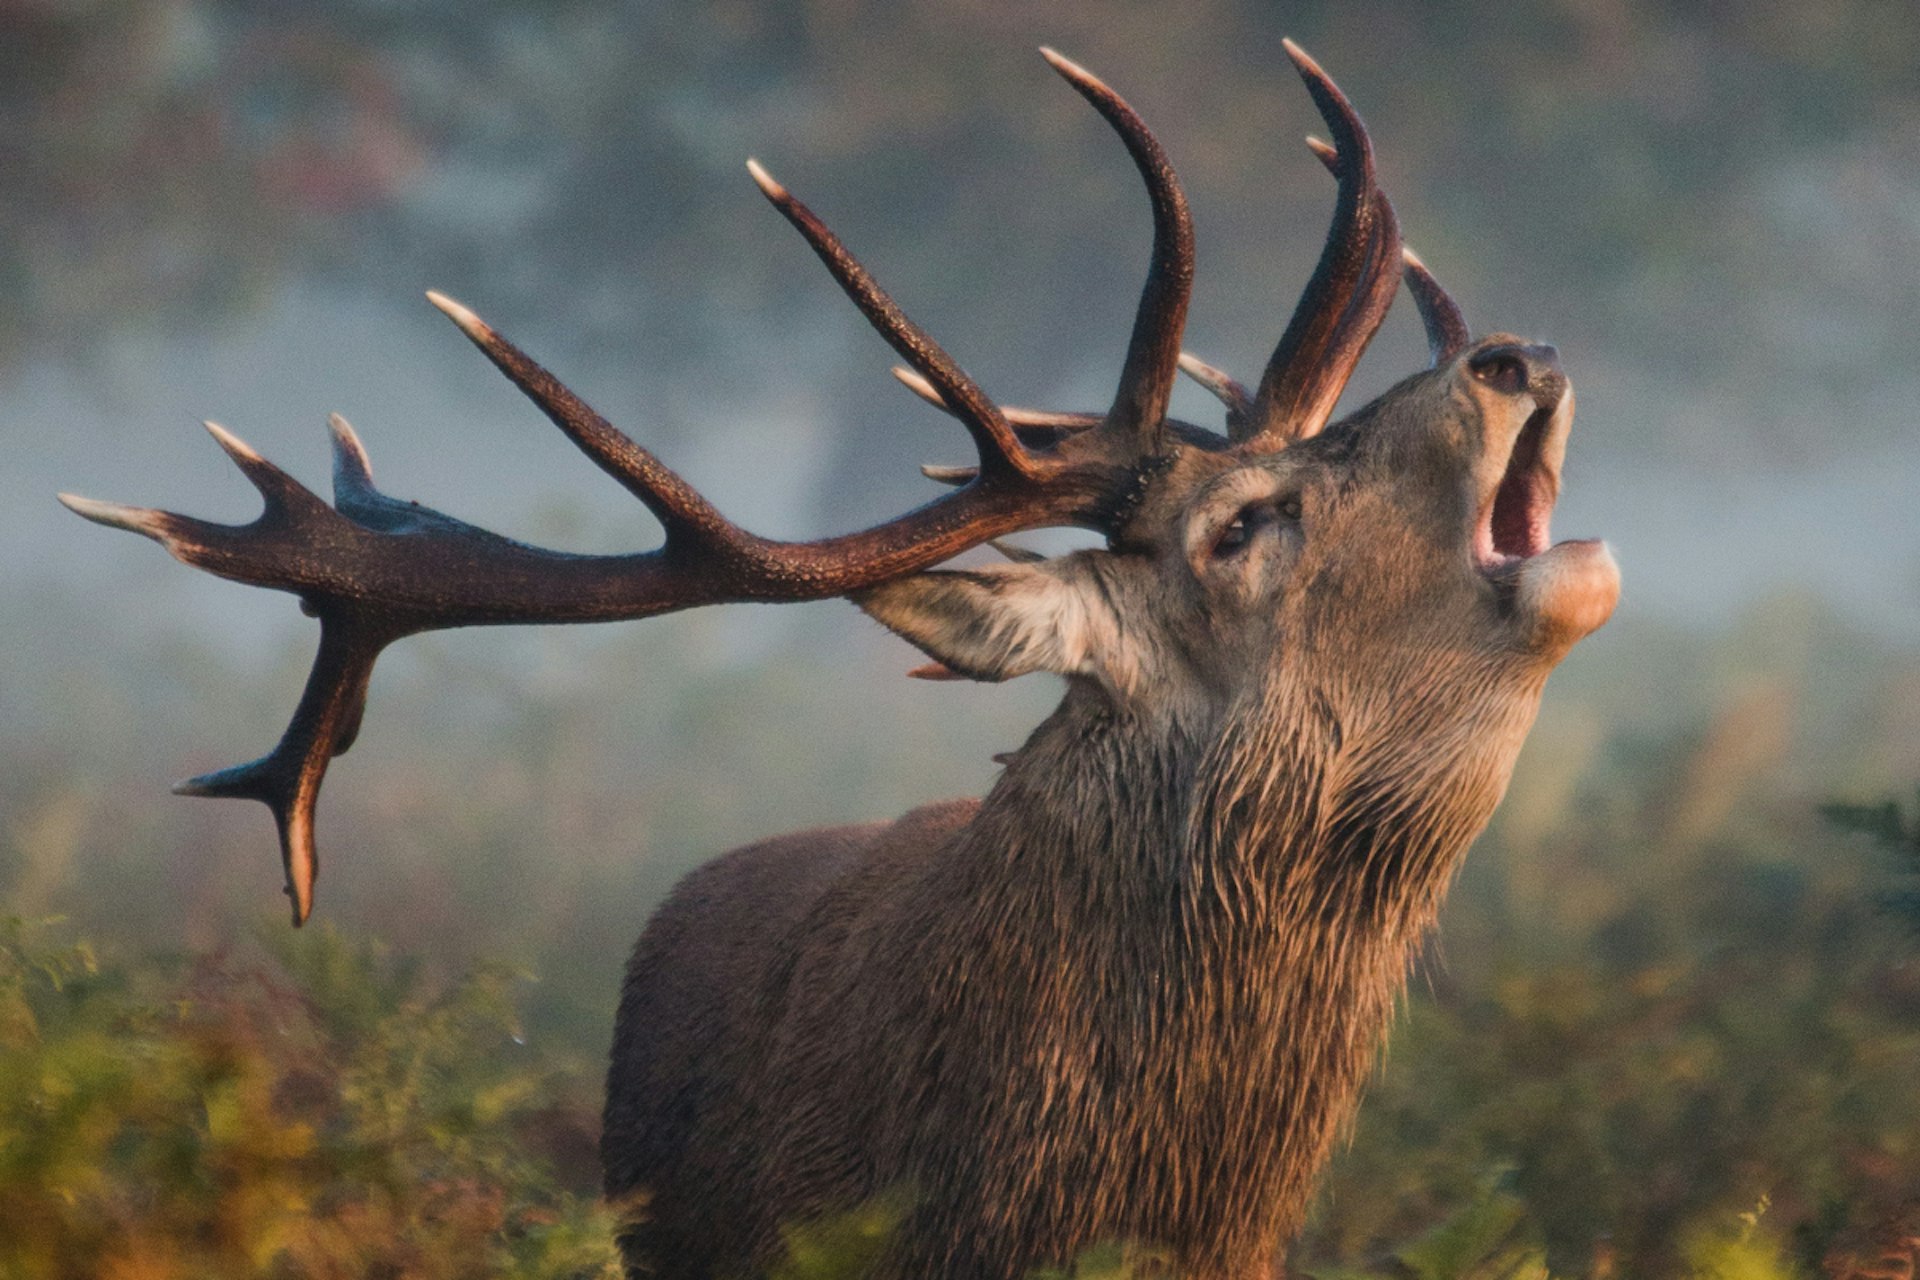 A red deer during the rut. Image by Alan Crossland / Getty